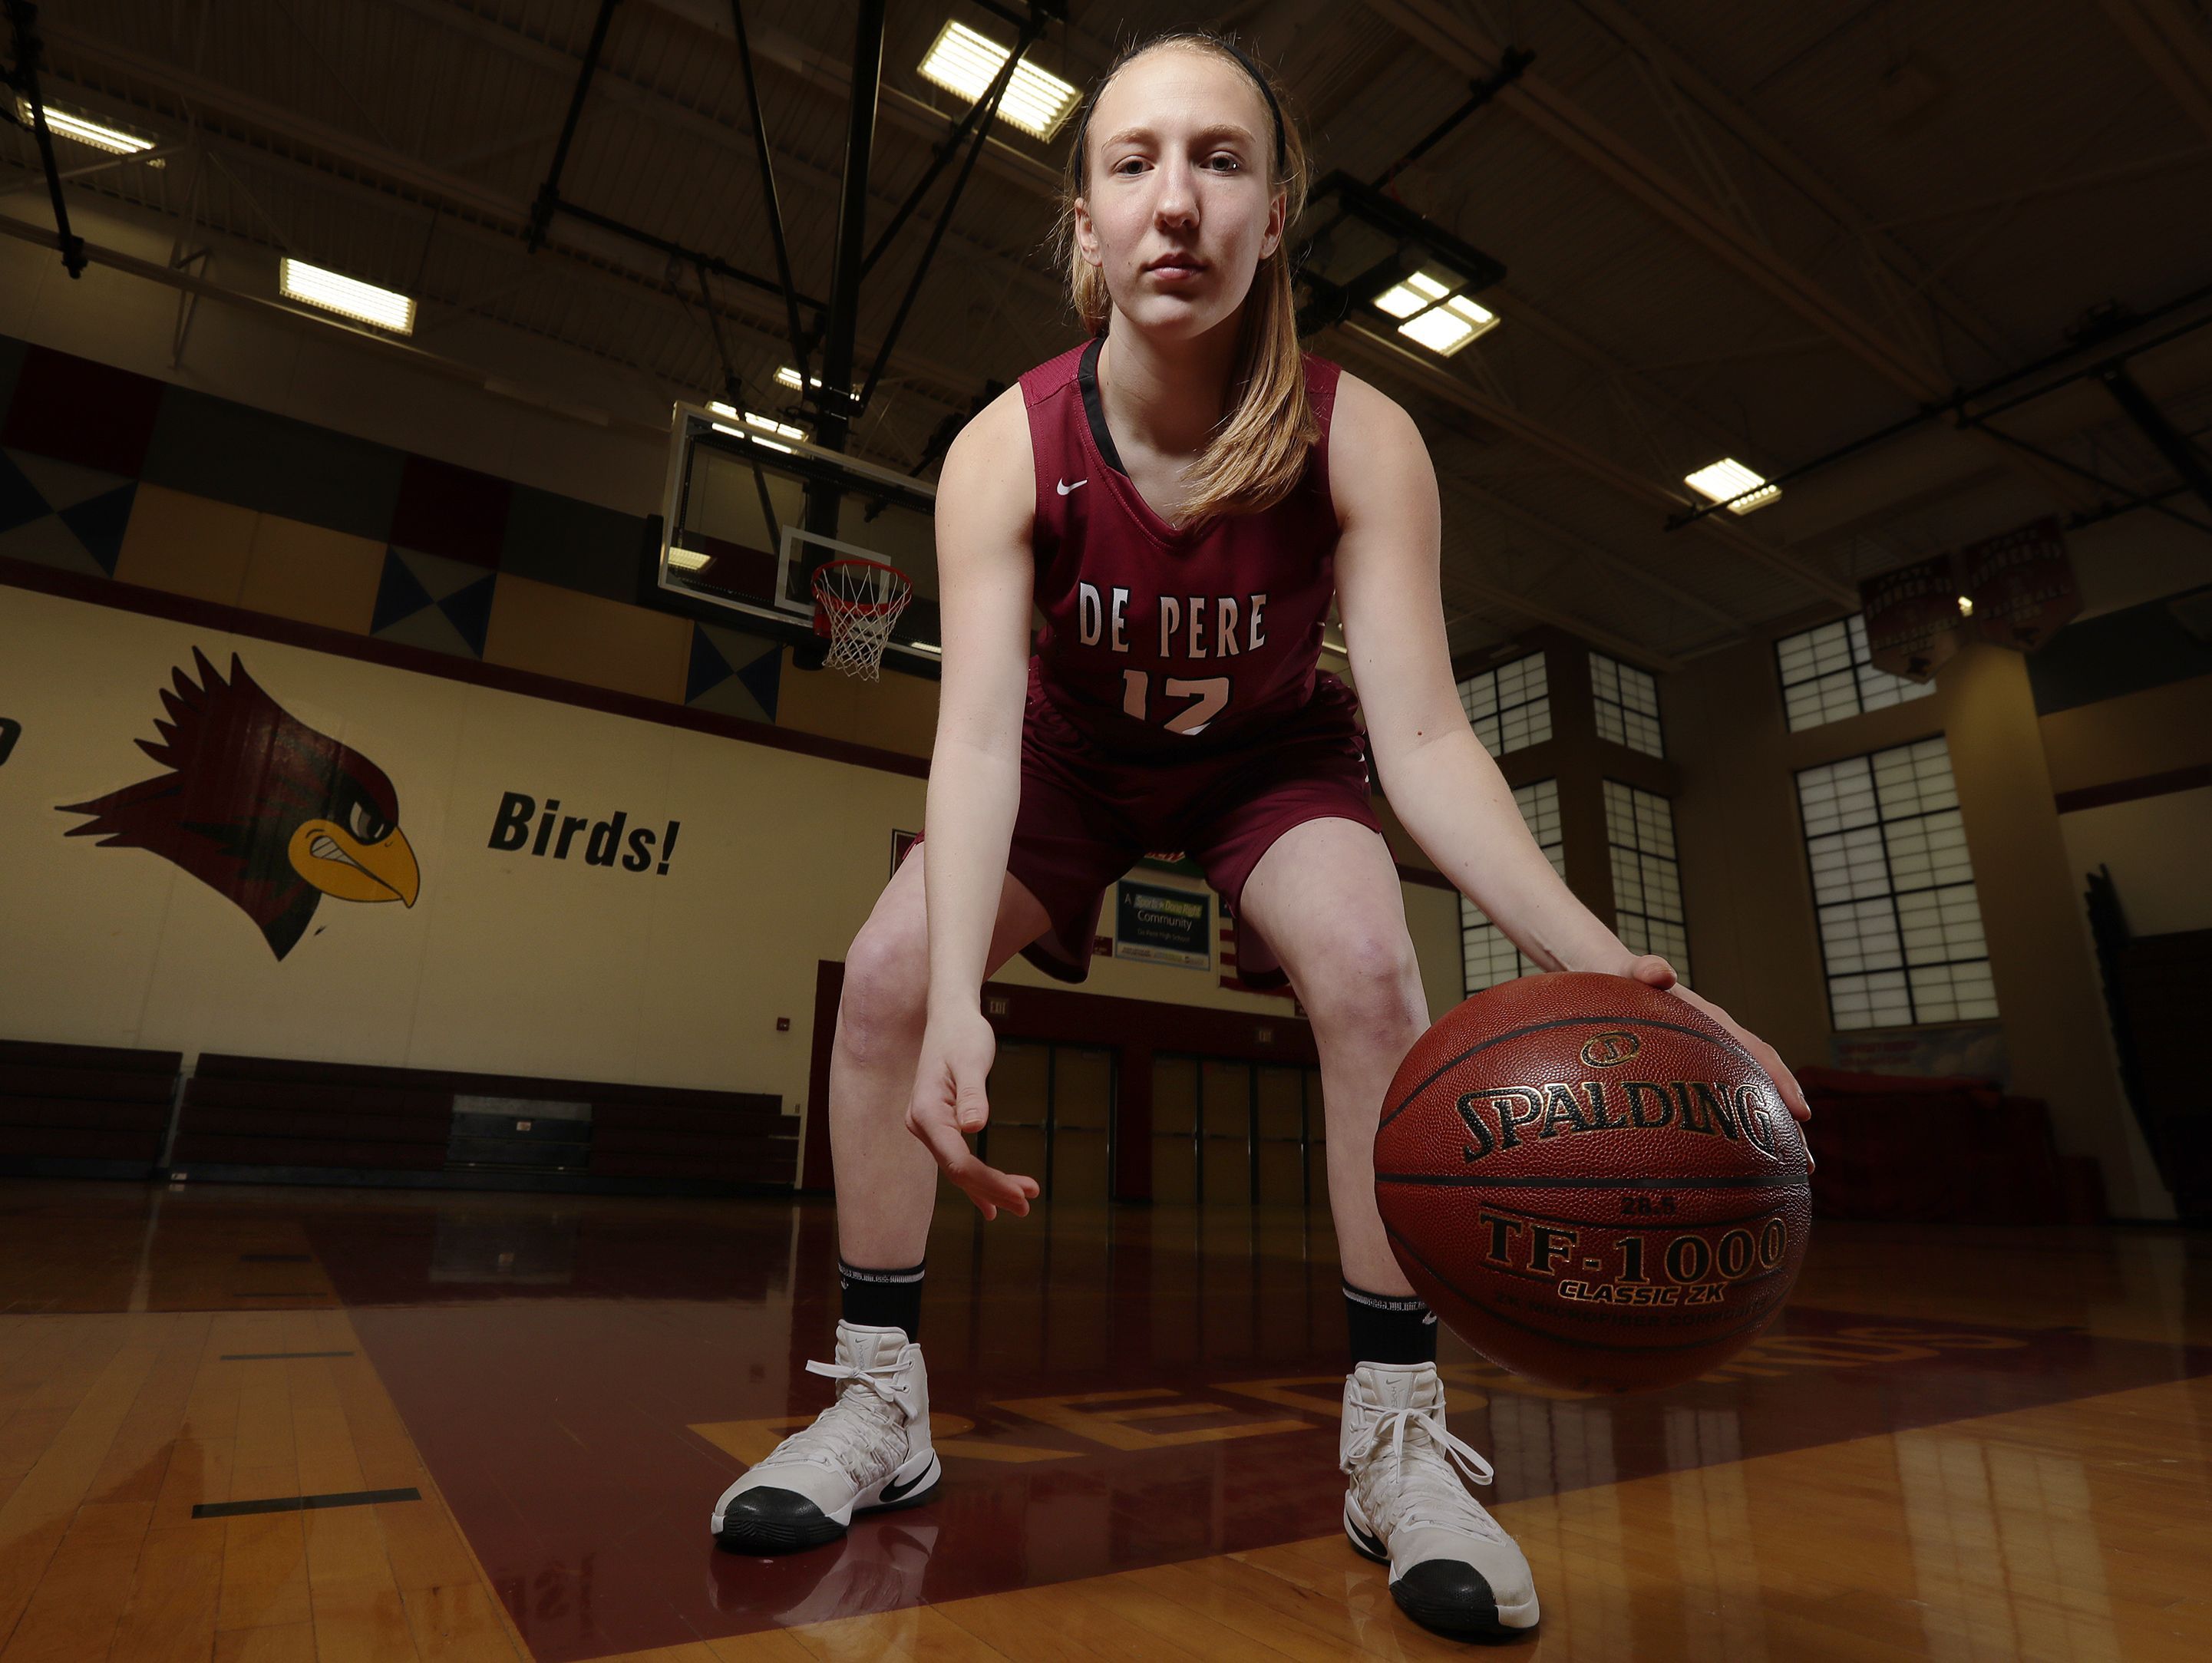 De Pere senior Lizzie Miller is the Green Bay Press-Gazette girls basketball player of the year. Miller averaged 14.8 points, 4.0 rebounds, 2.4 assists and 1.8 steals in guiding her team to a WIAA Division 1 state runner-up finish.